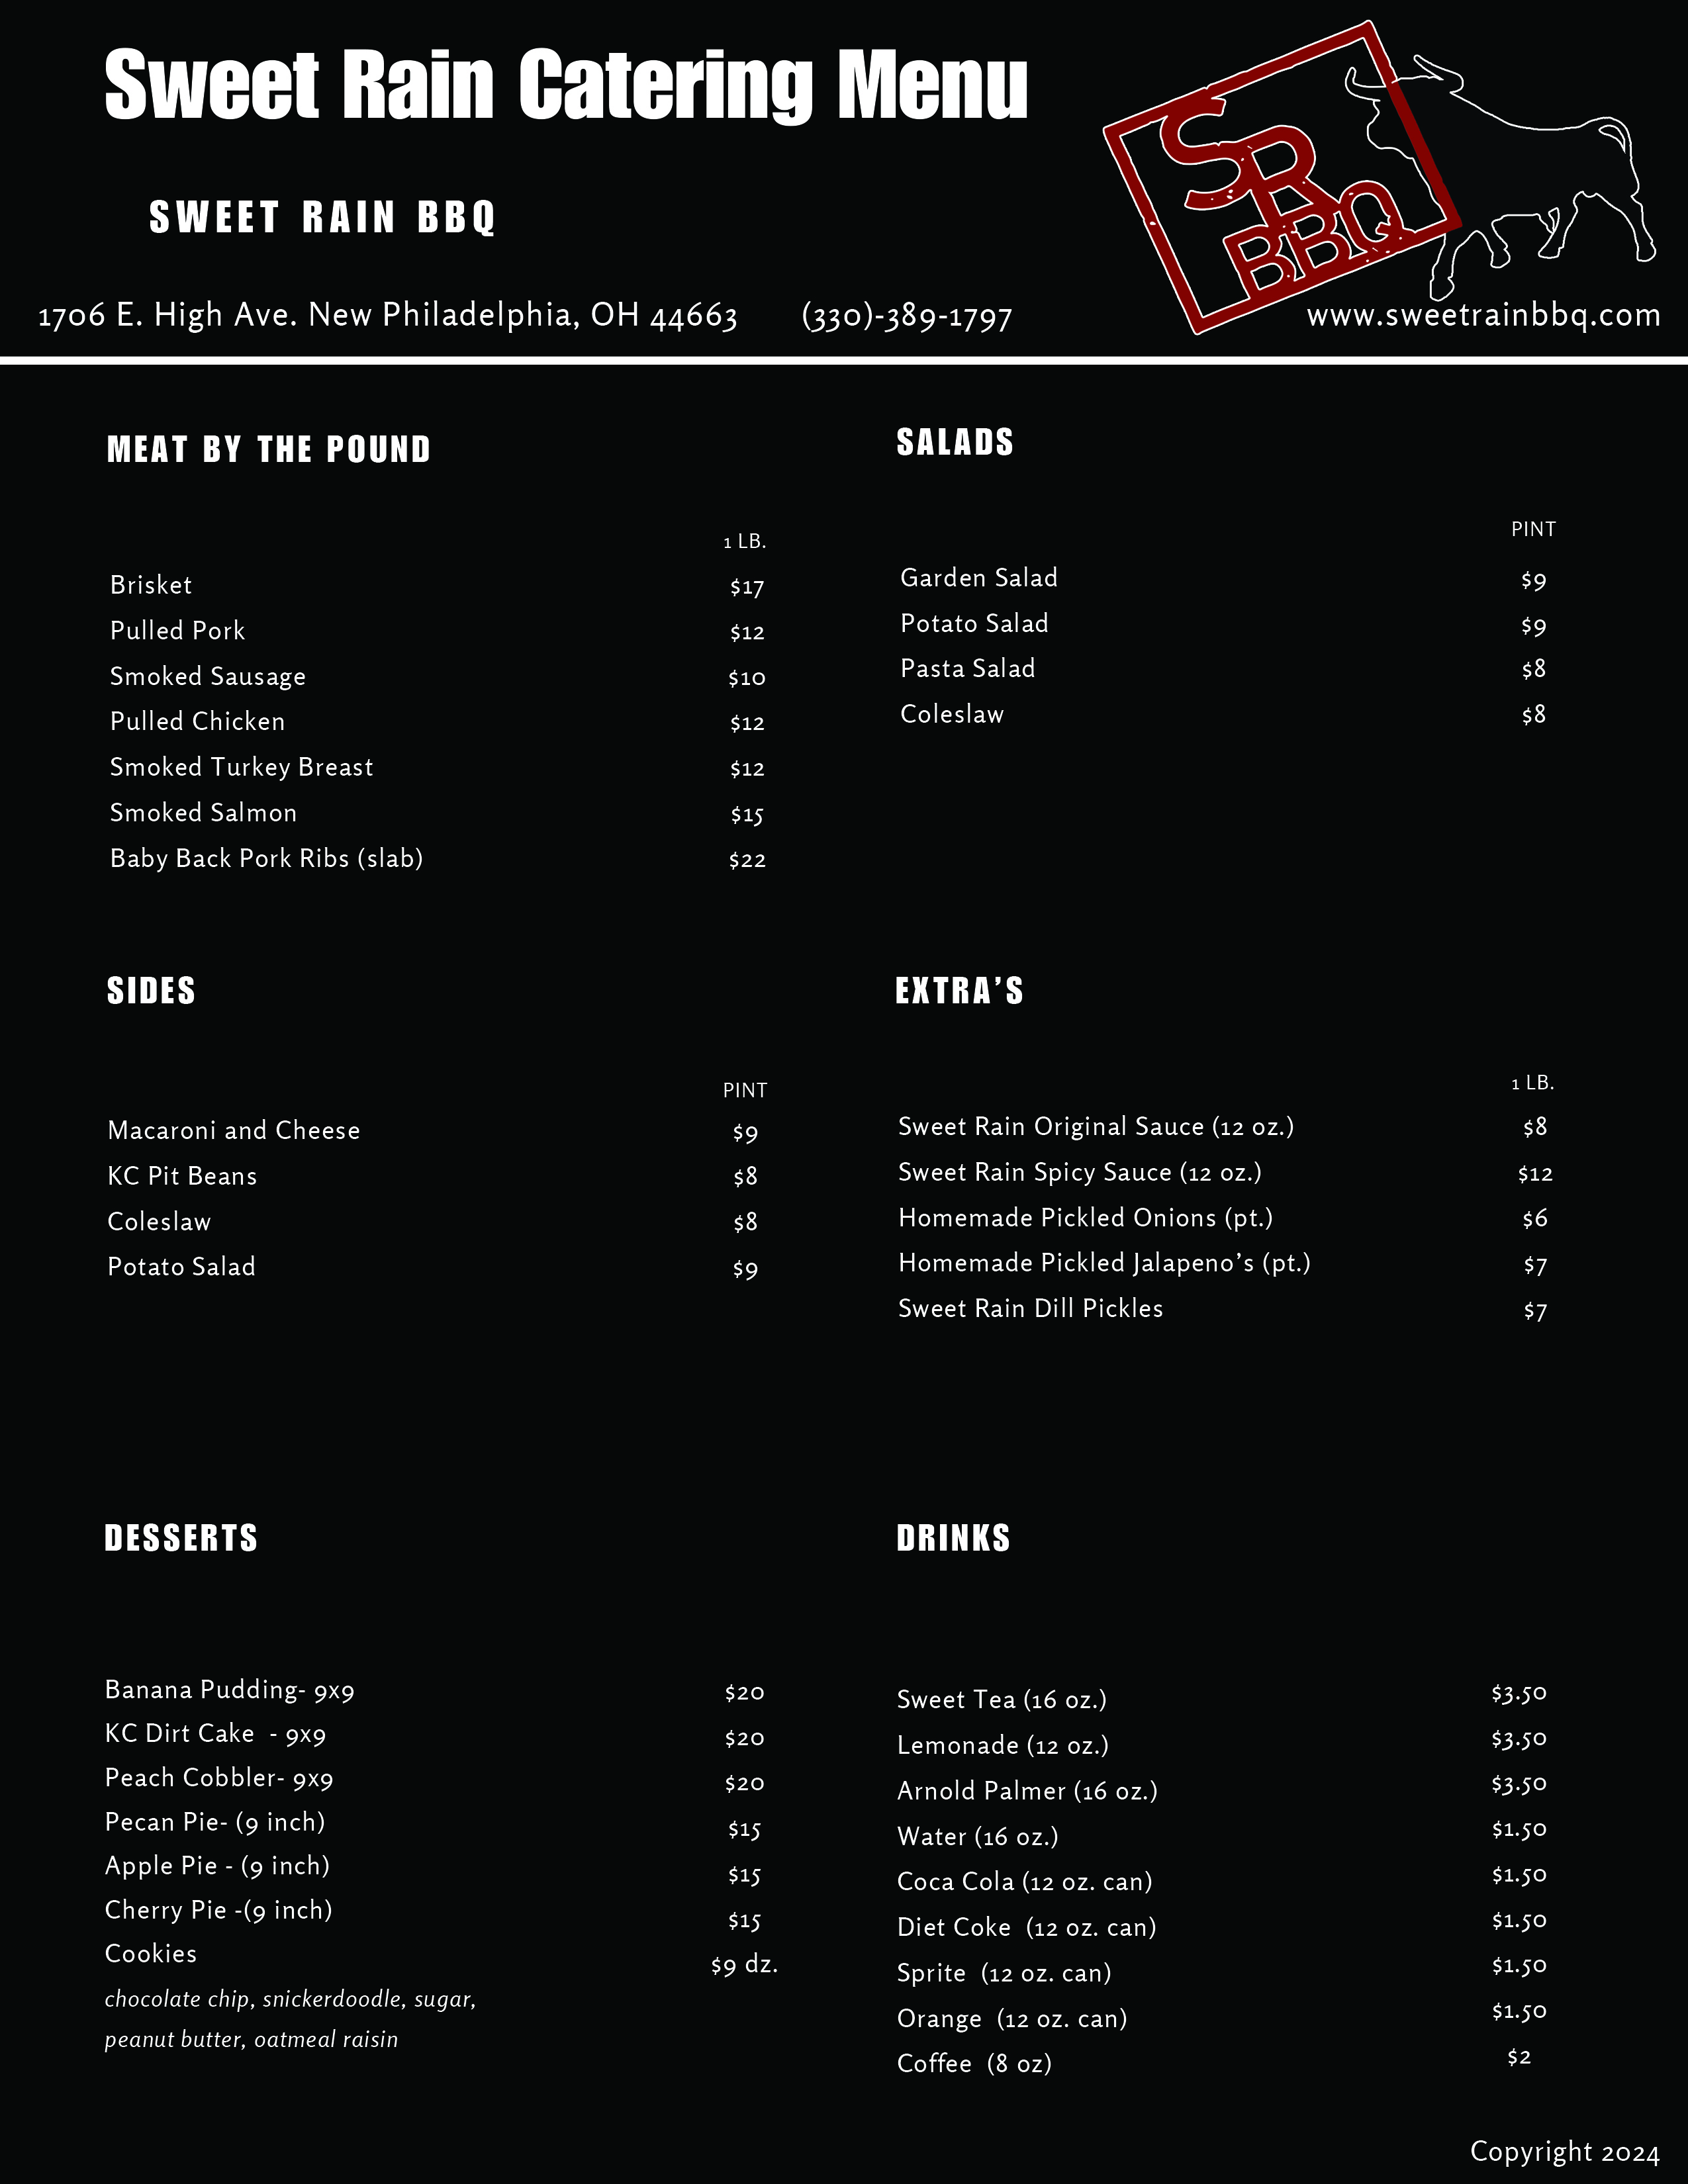 Catering Menu Page 1